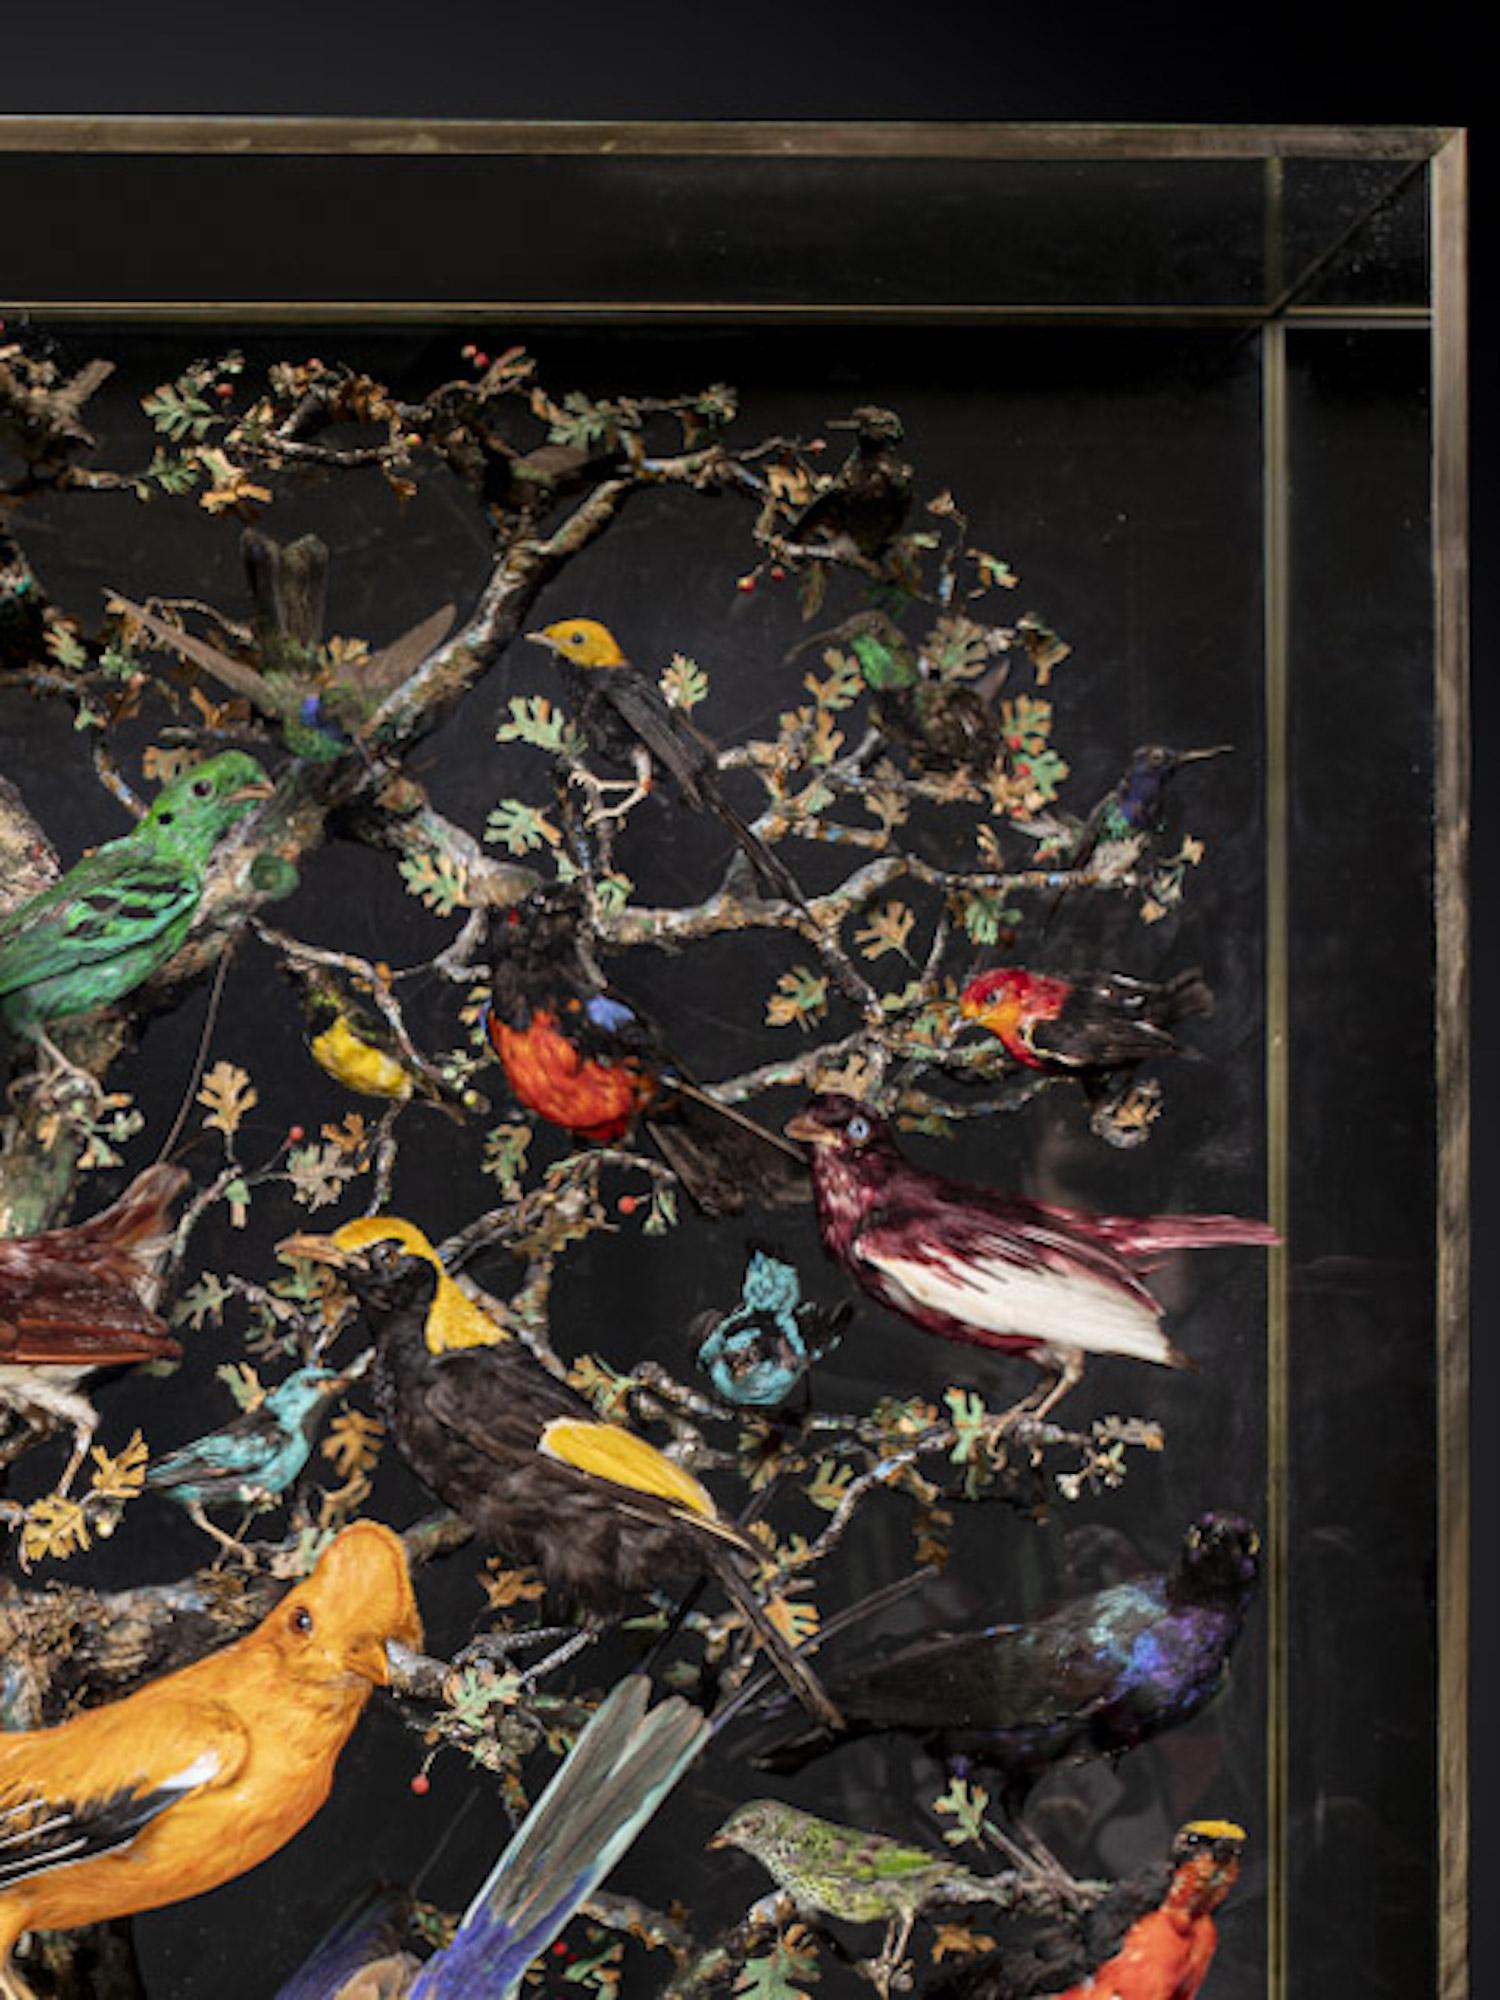 Antique 19th C French Napoléon III Diorama of 50 taxidermy tropical birds ,variously perched on branches and groundwork ,set within its three glass ebonised case .Species preconvention 01/06/1947 can be commercialised in accordance with rule